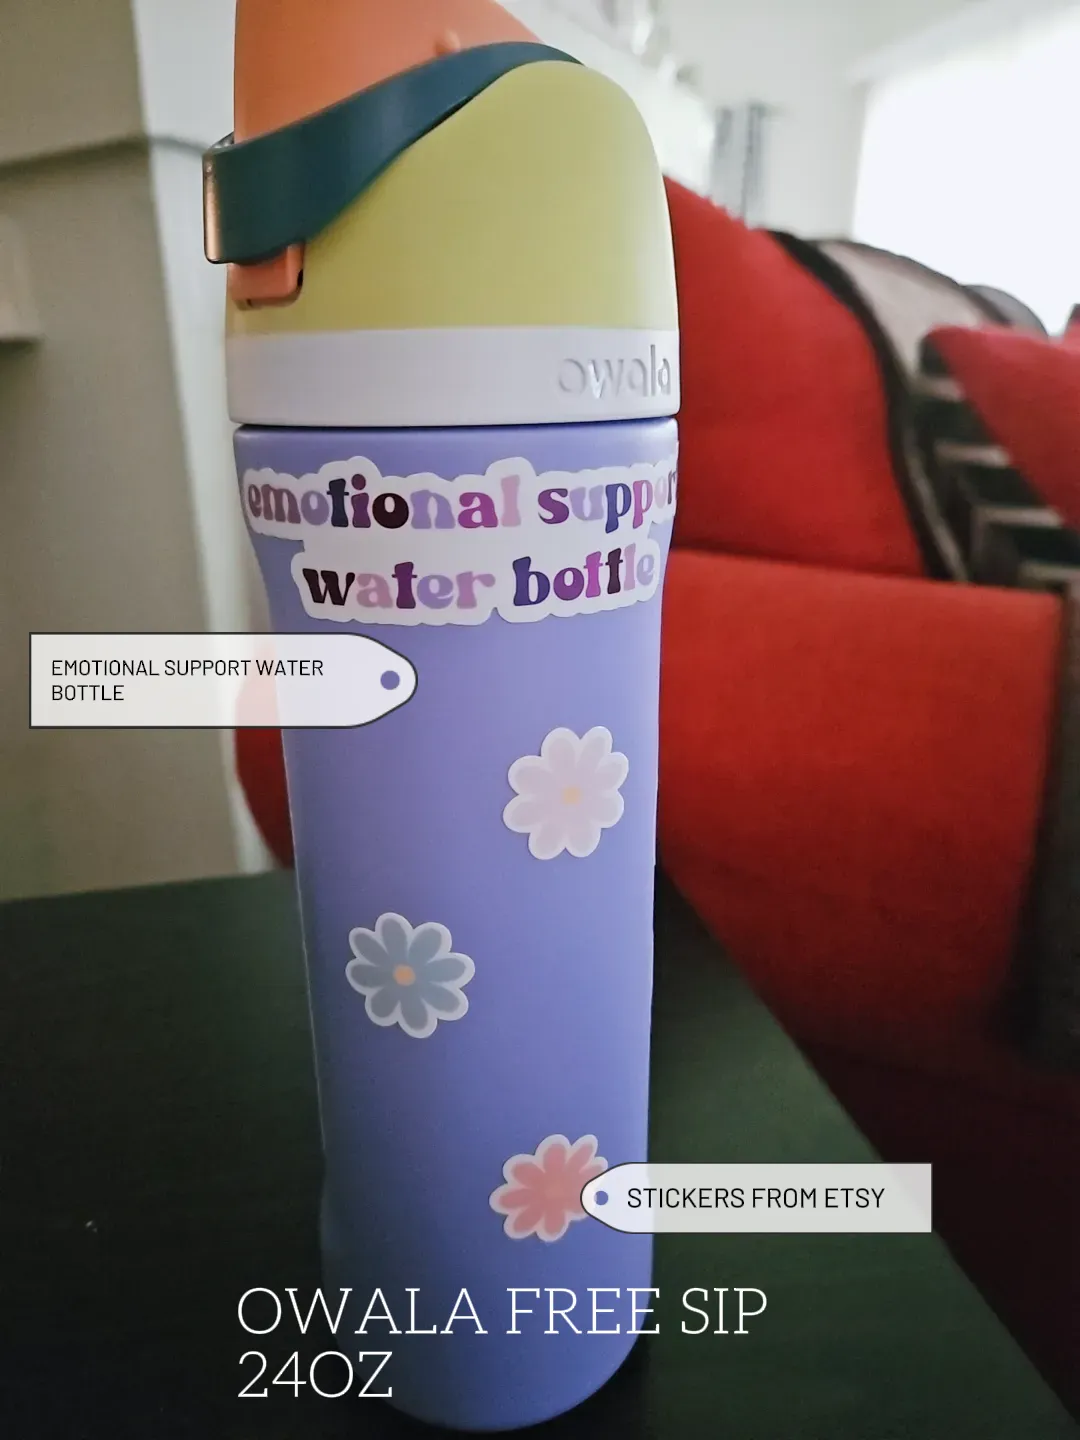 motivational water bottle stickers for stress relief - Lemon8 Search